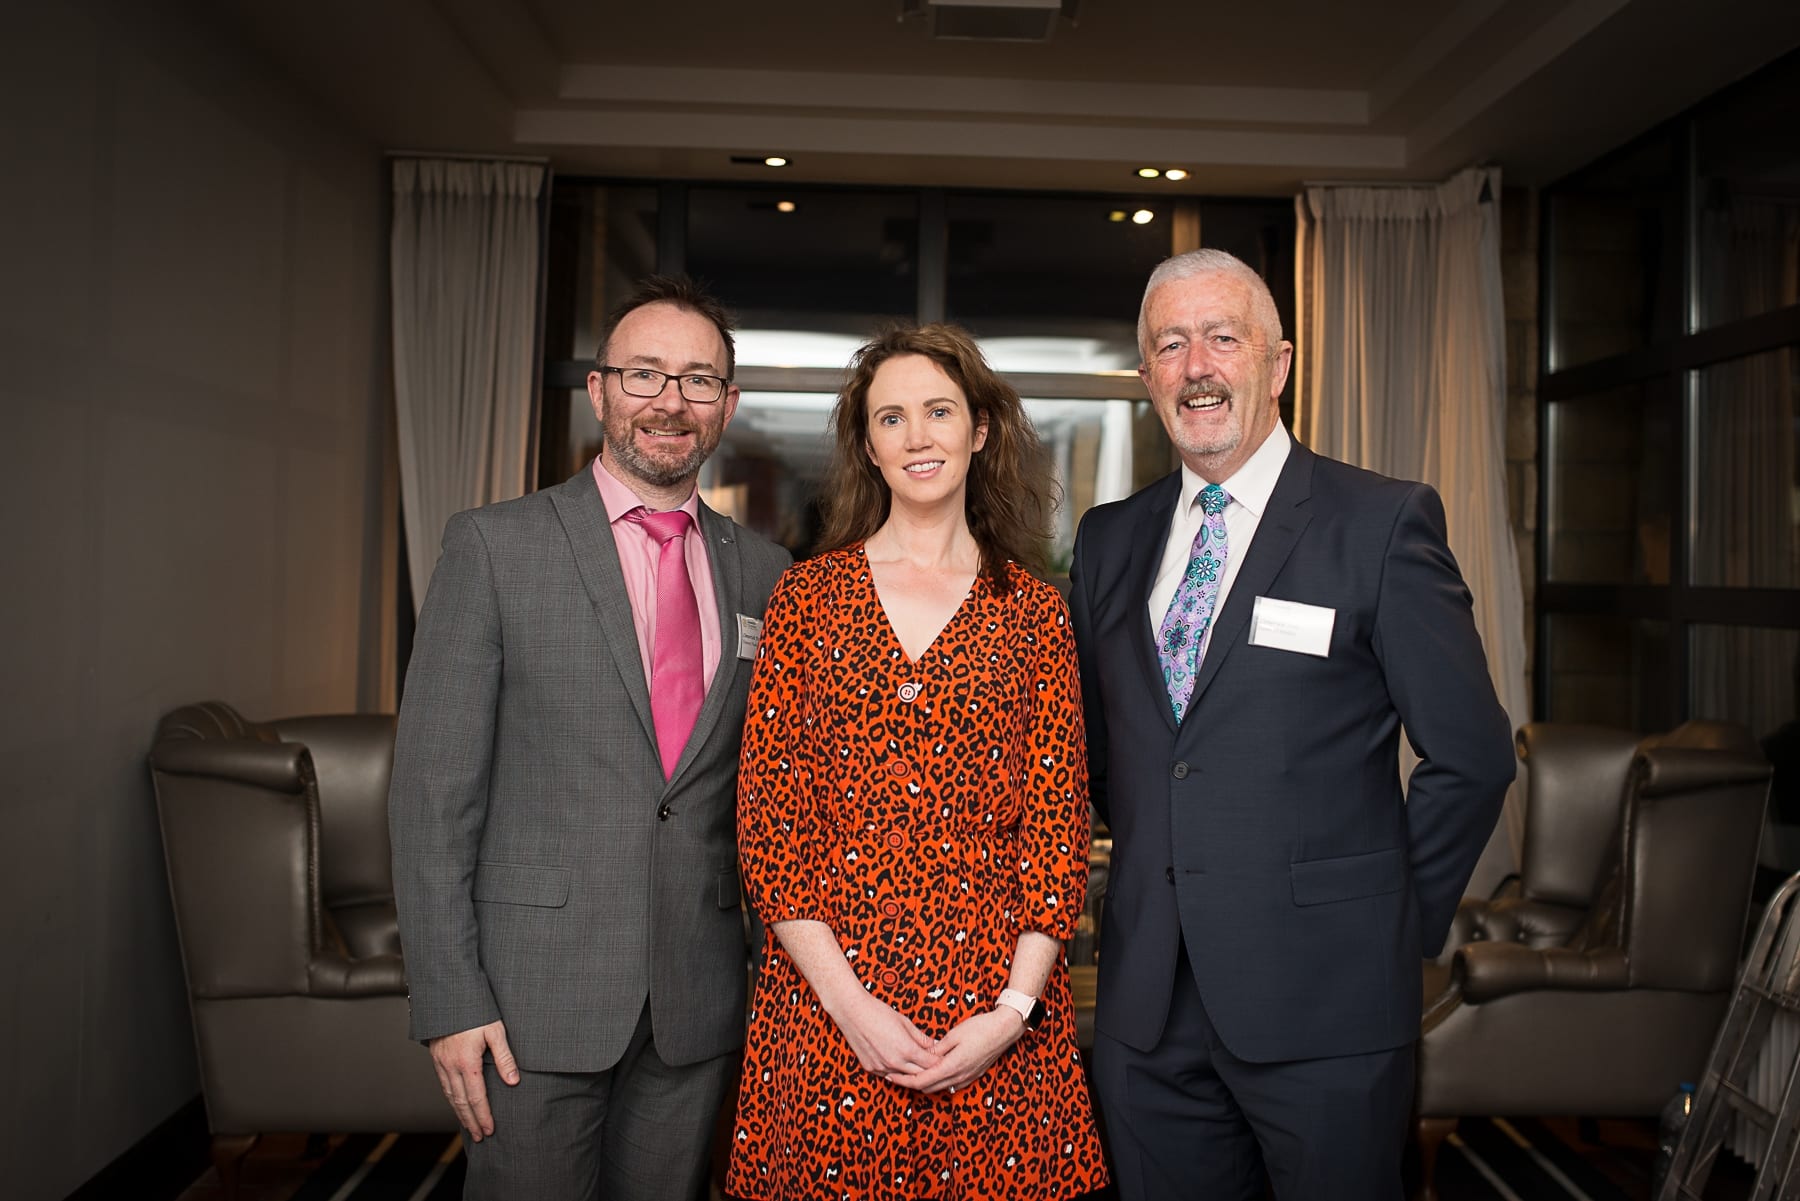 Economic Breakfast Briefing; European and Local Economic Outlook In association with the Limerick Post which took place in the Castletroy Park Hotel on Monday 11th Feb 2019:  From left to right: Darren Nash -the Limerick Post Newspaper,  Mary McNamee - Limerick Chamber.Gerry O’Malley - the Limerick Post Newspaper.   Image by Morning Star Photography